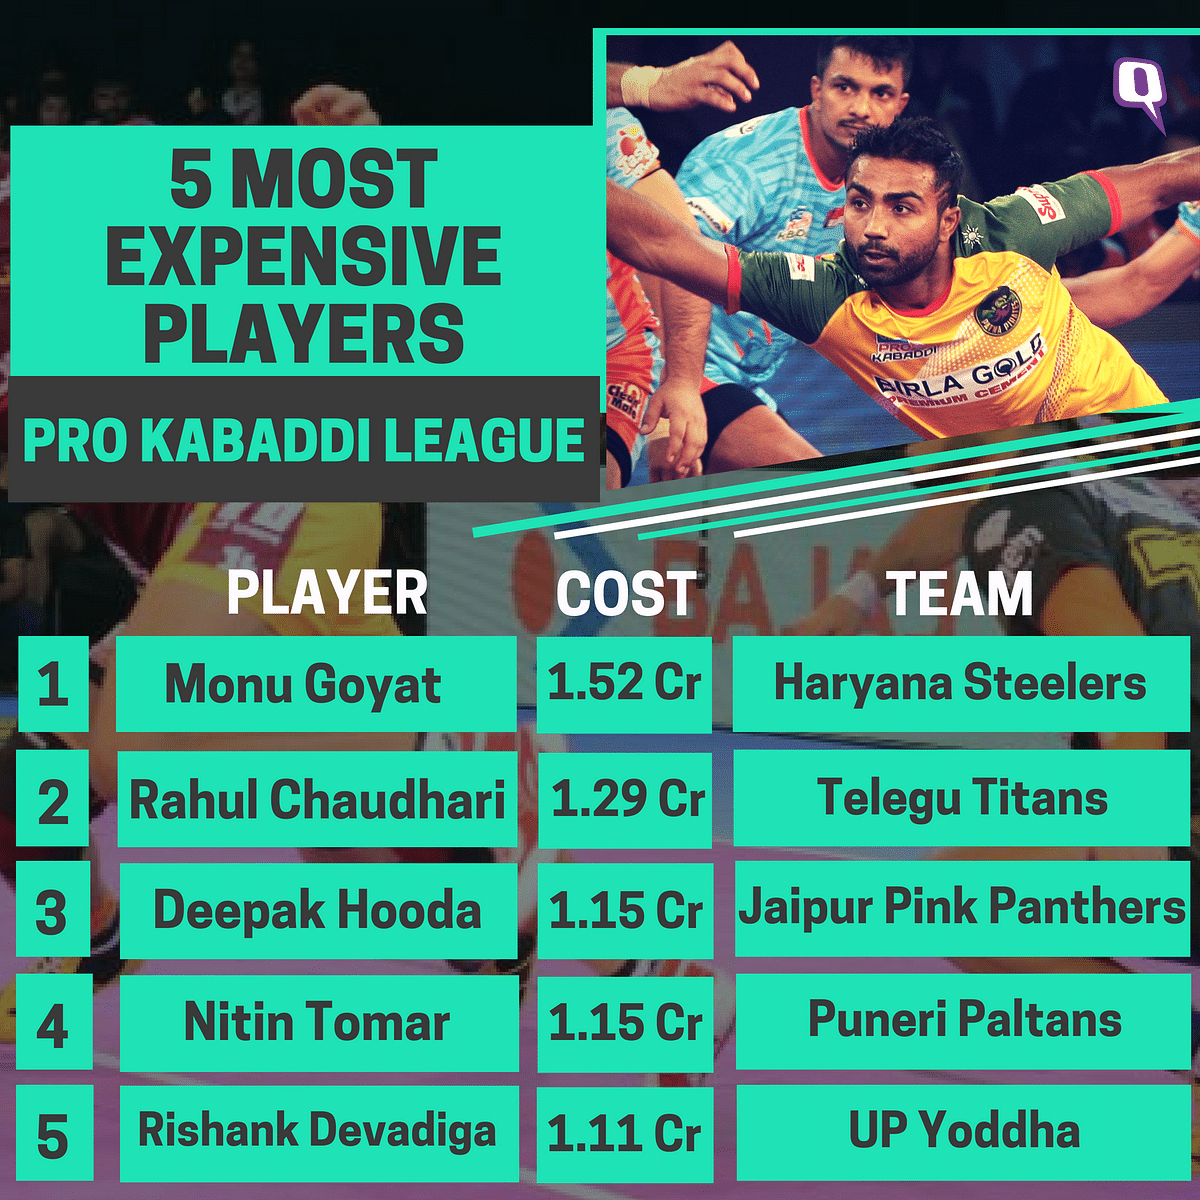 Catch all the LIVE updates from the Pro Kabaddi League Auction 2018 